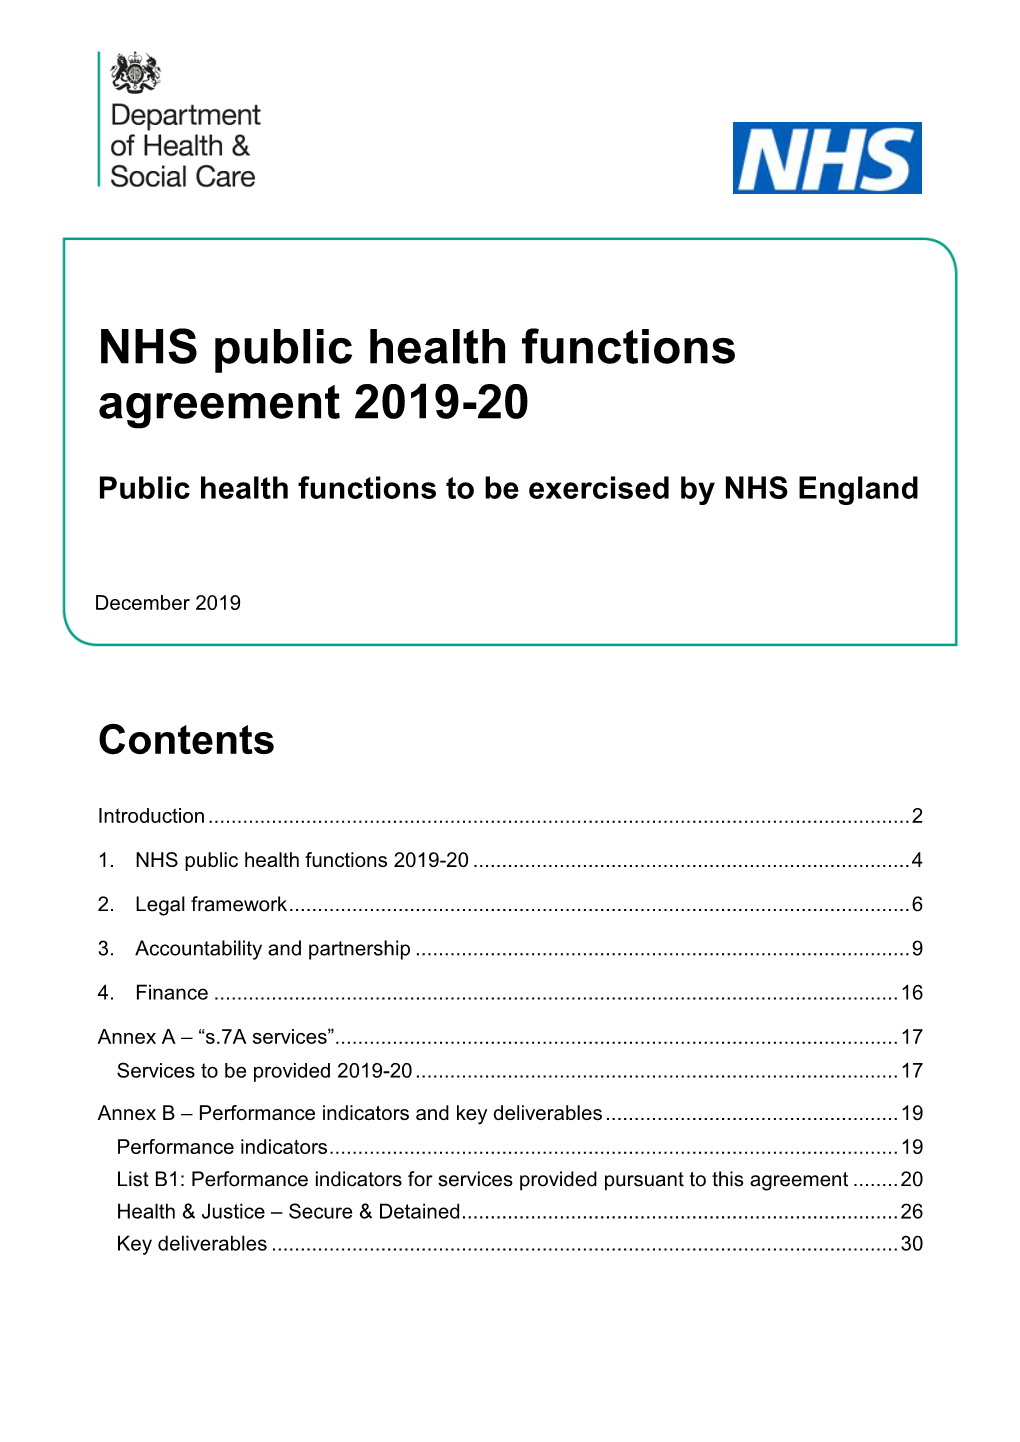 NHS Public Health Functions Agreement 2019-20